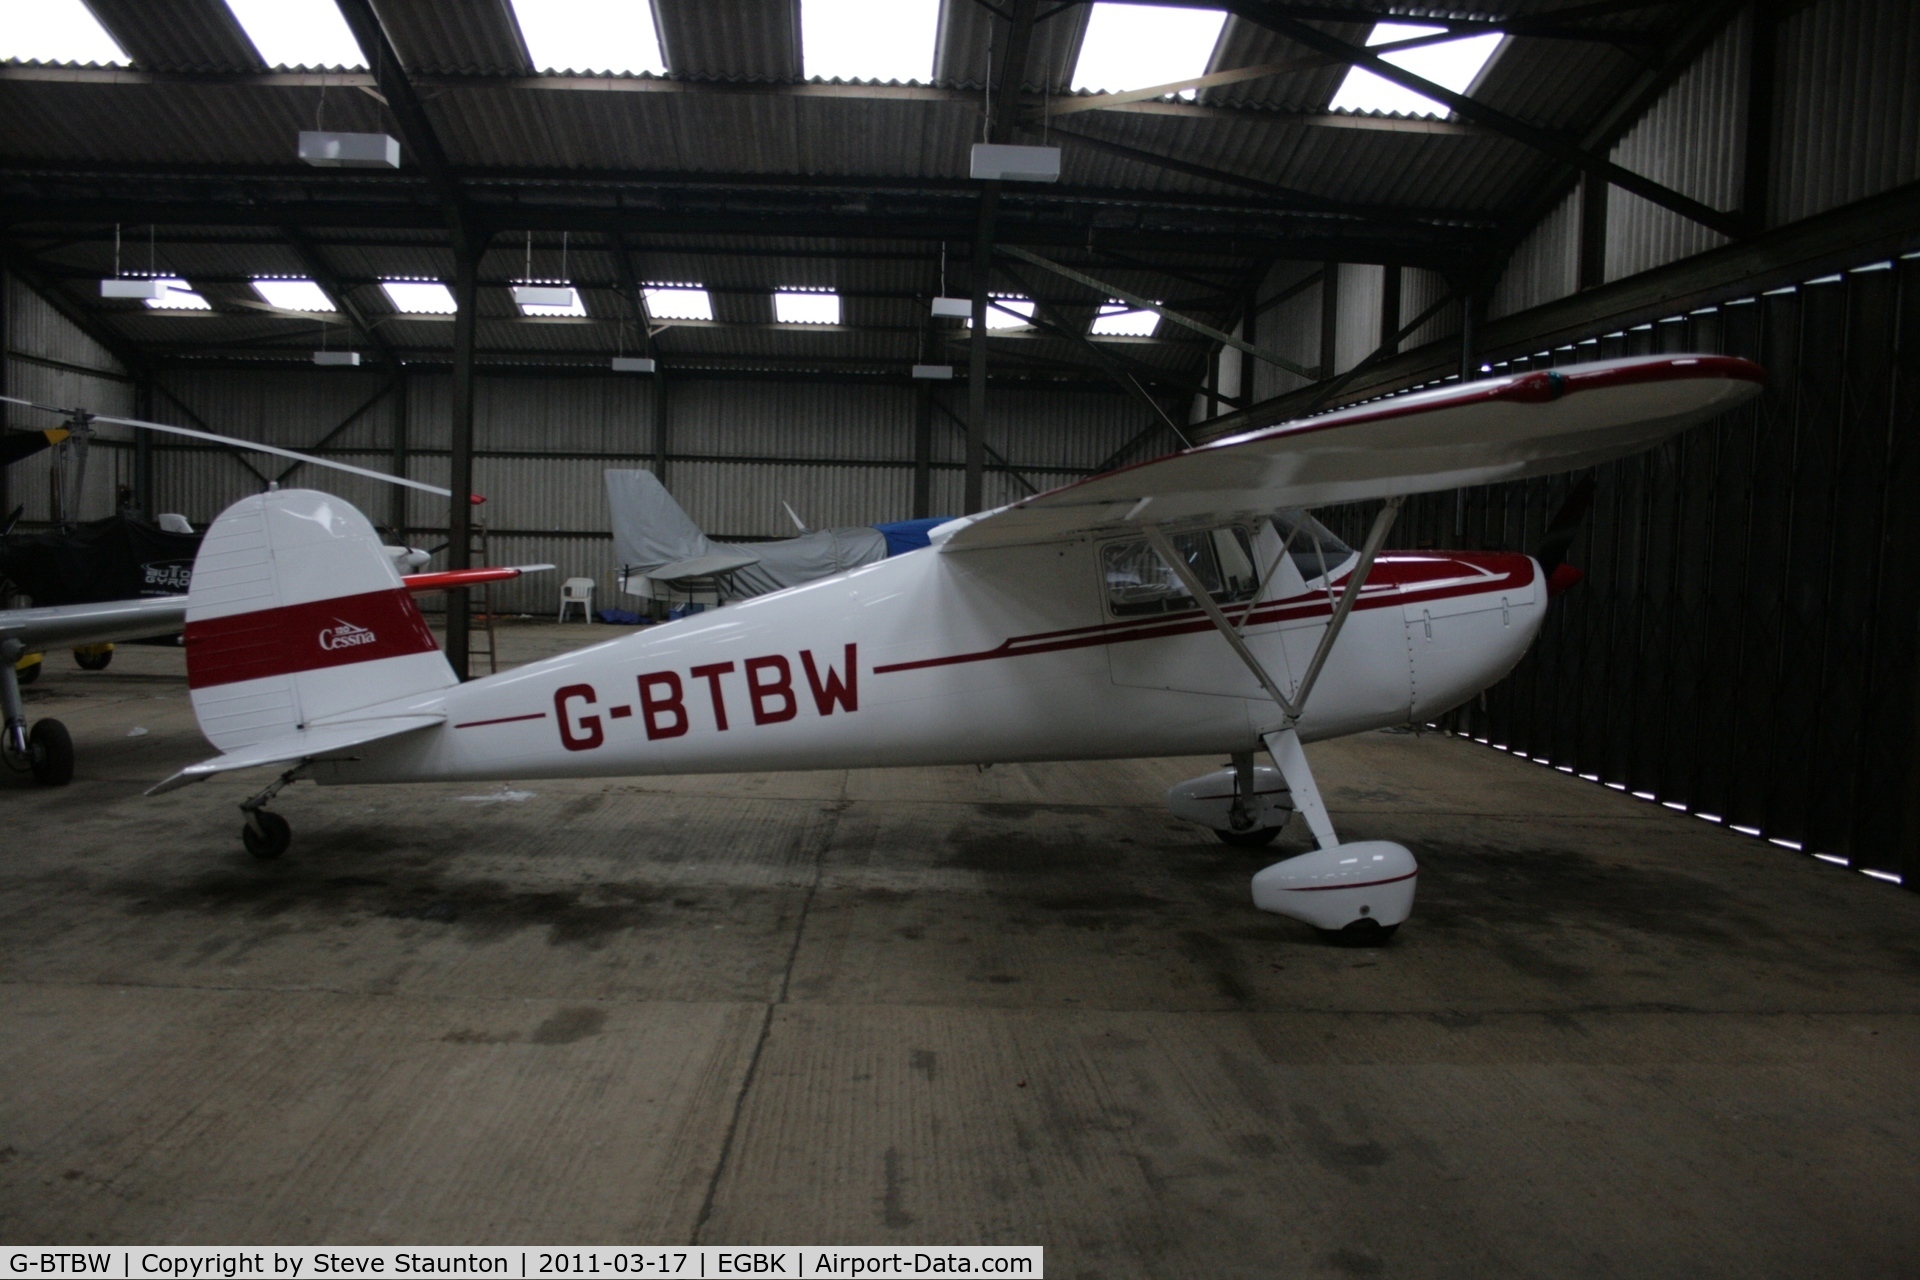 G-BTBW, 1947 Cessna 120 C/N 14220, Taken at Sywell Airfield March 2011